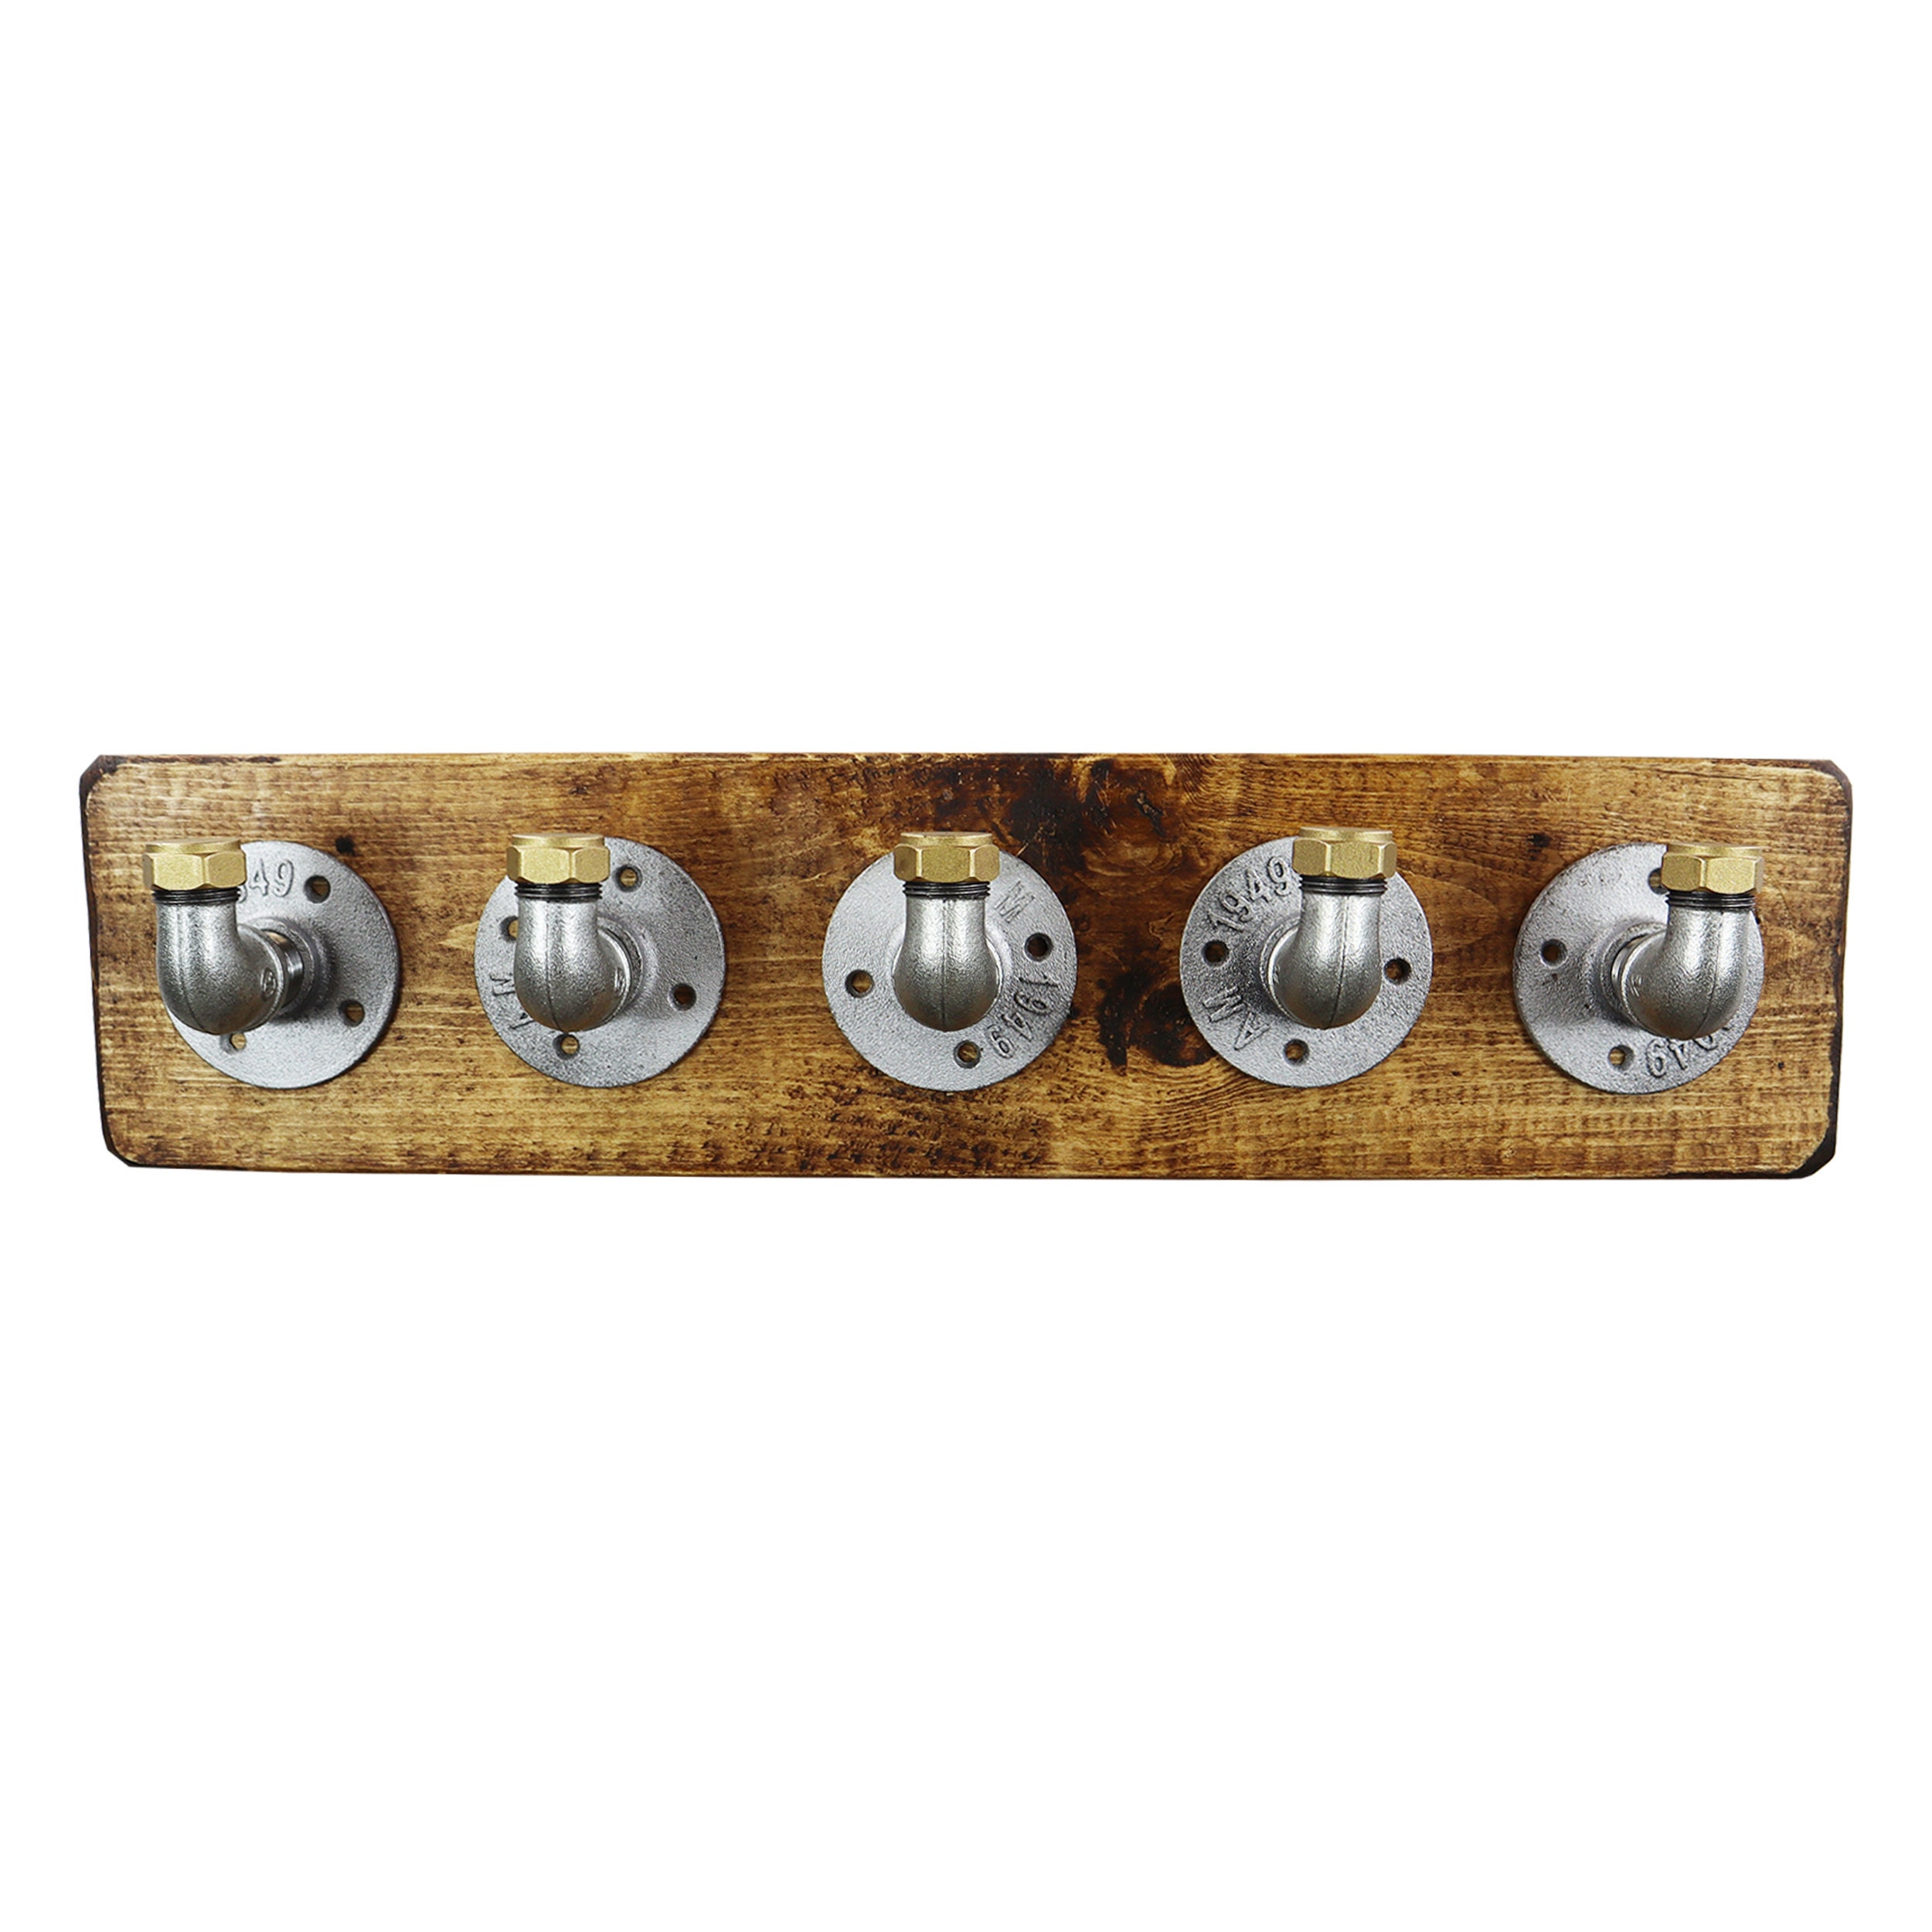 INDUSTRIAL Pipe Coat Hooks Silver Steel & Brass Pipe Fittings High Quality  wood Included Vintage Style 